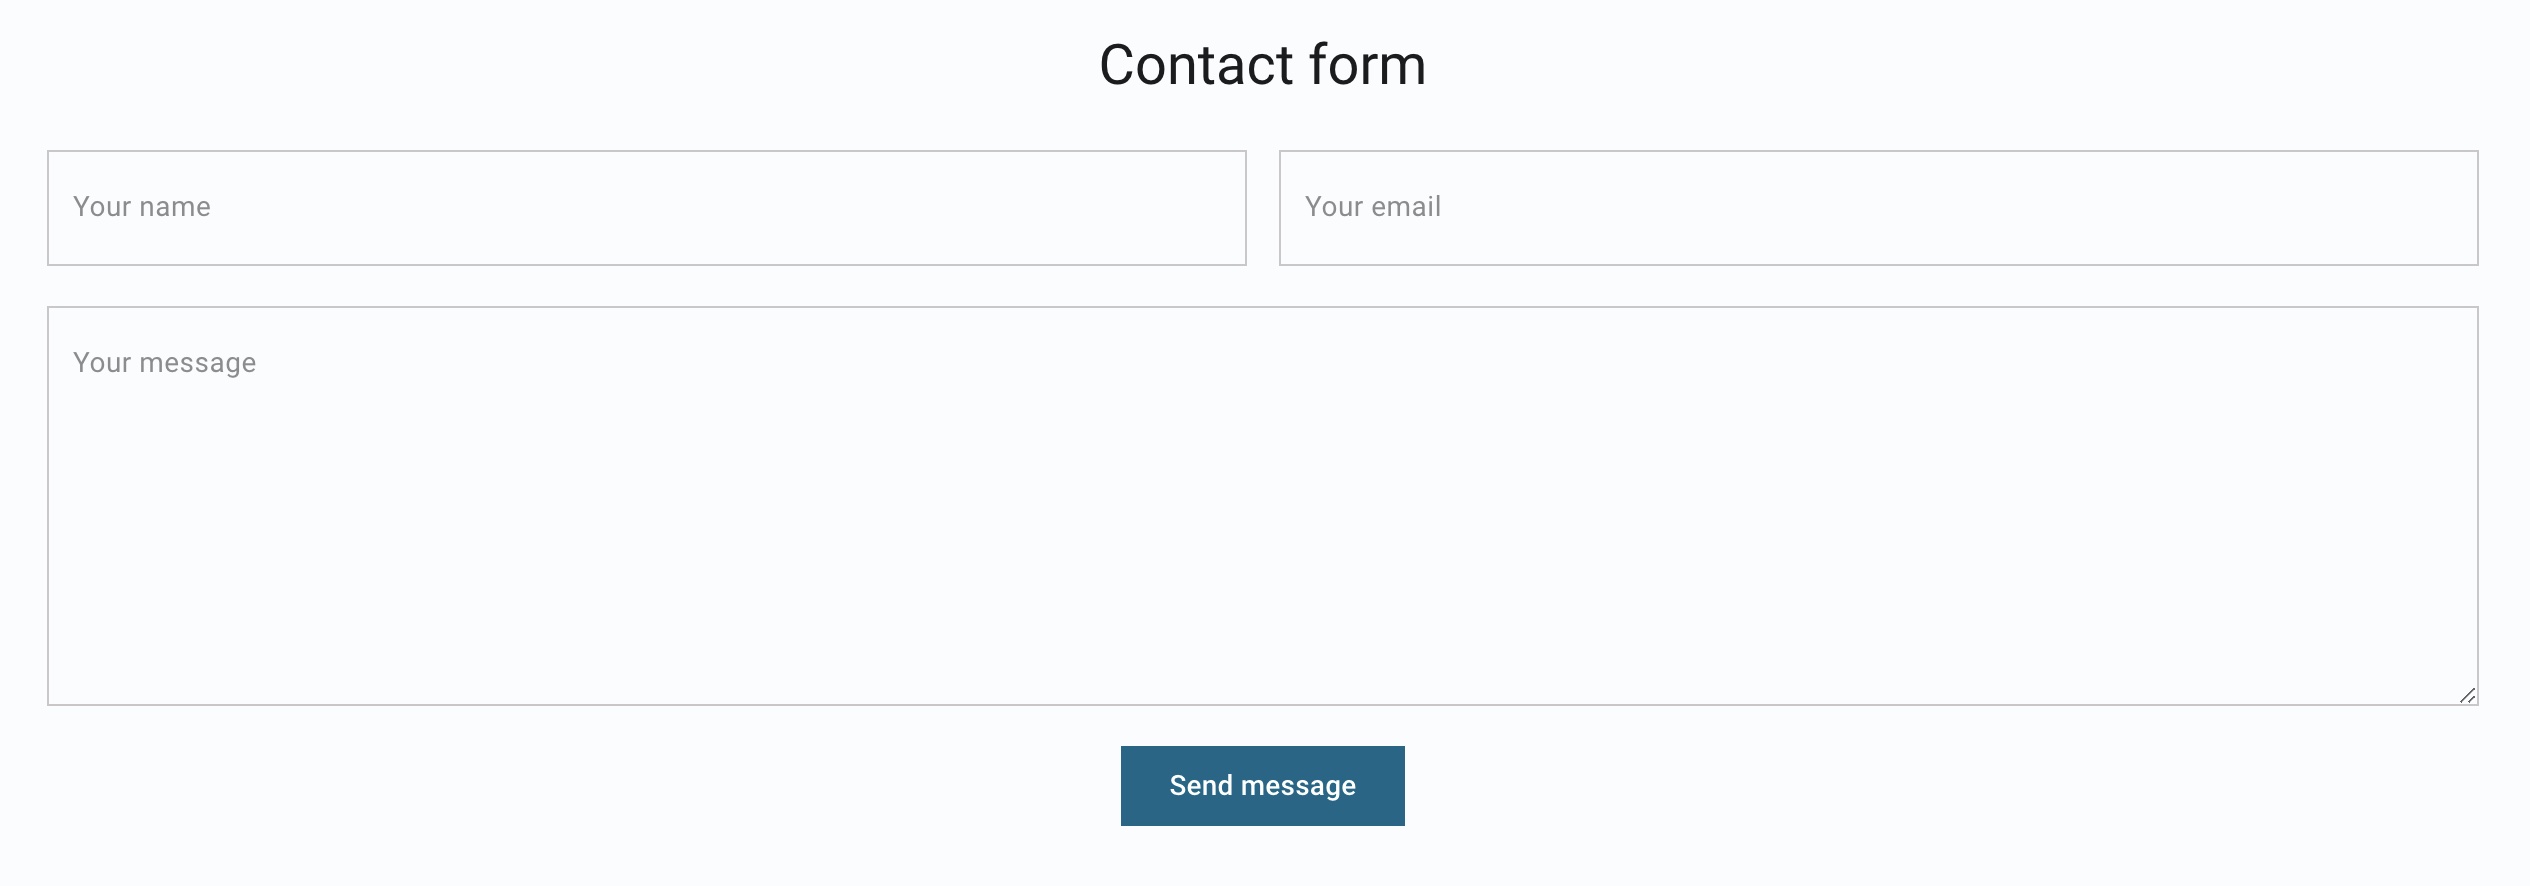 section-contact-form.jpg